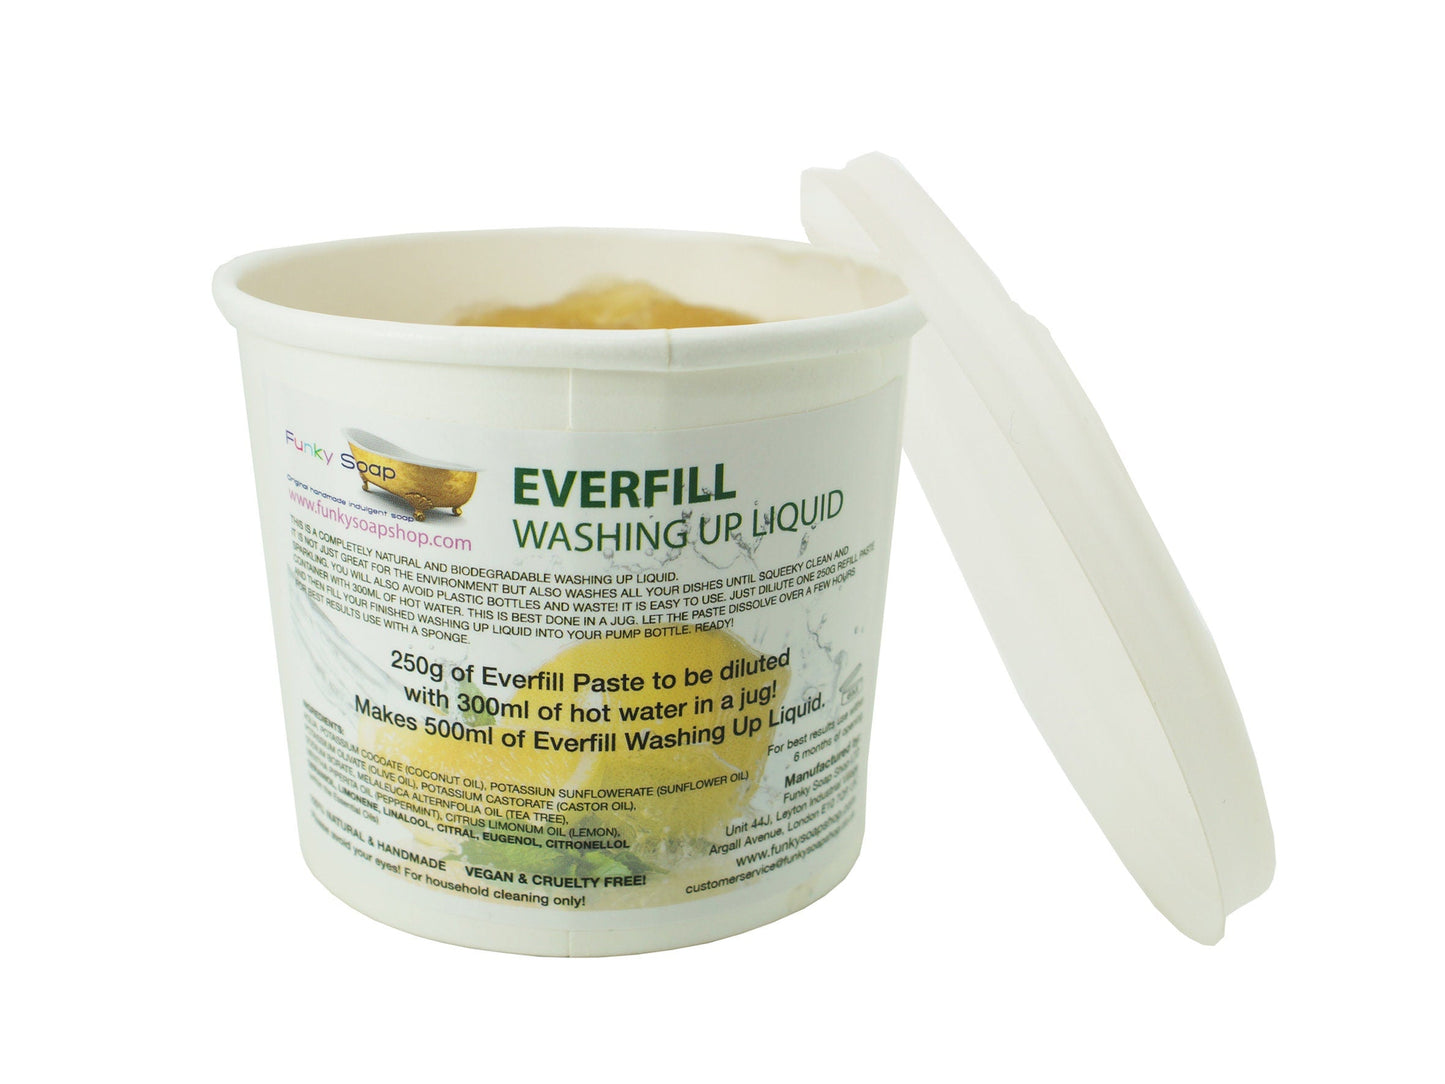 EVERFILL Washing Up Liquid, Refill 250g - Funky Soap Shop